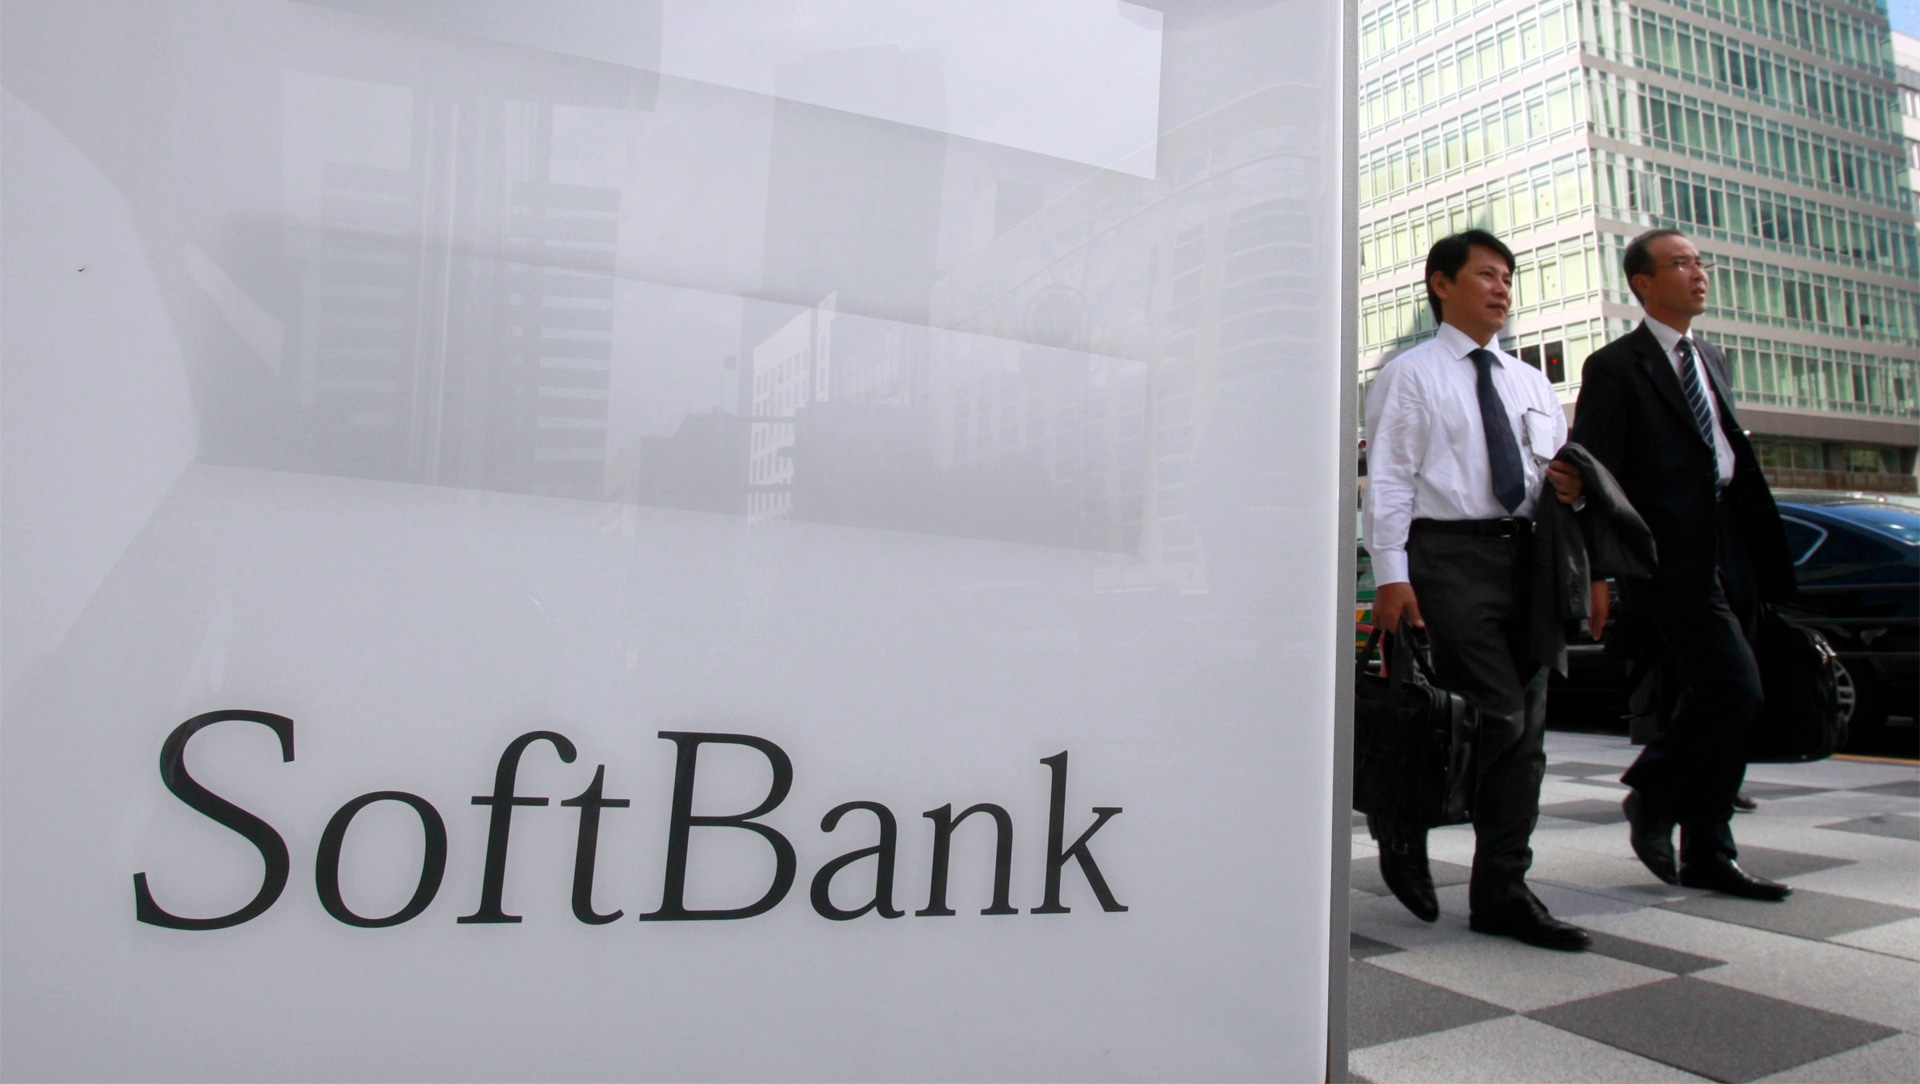 Apple, Microsoft and other giants will invest in new SoftBank innovation fund